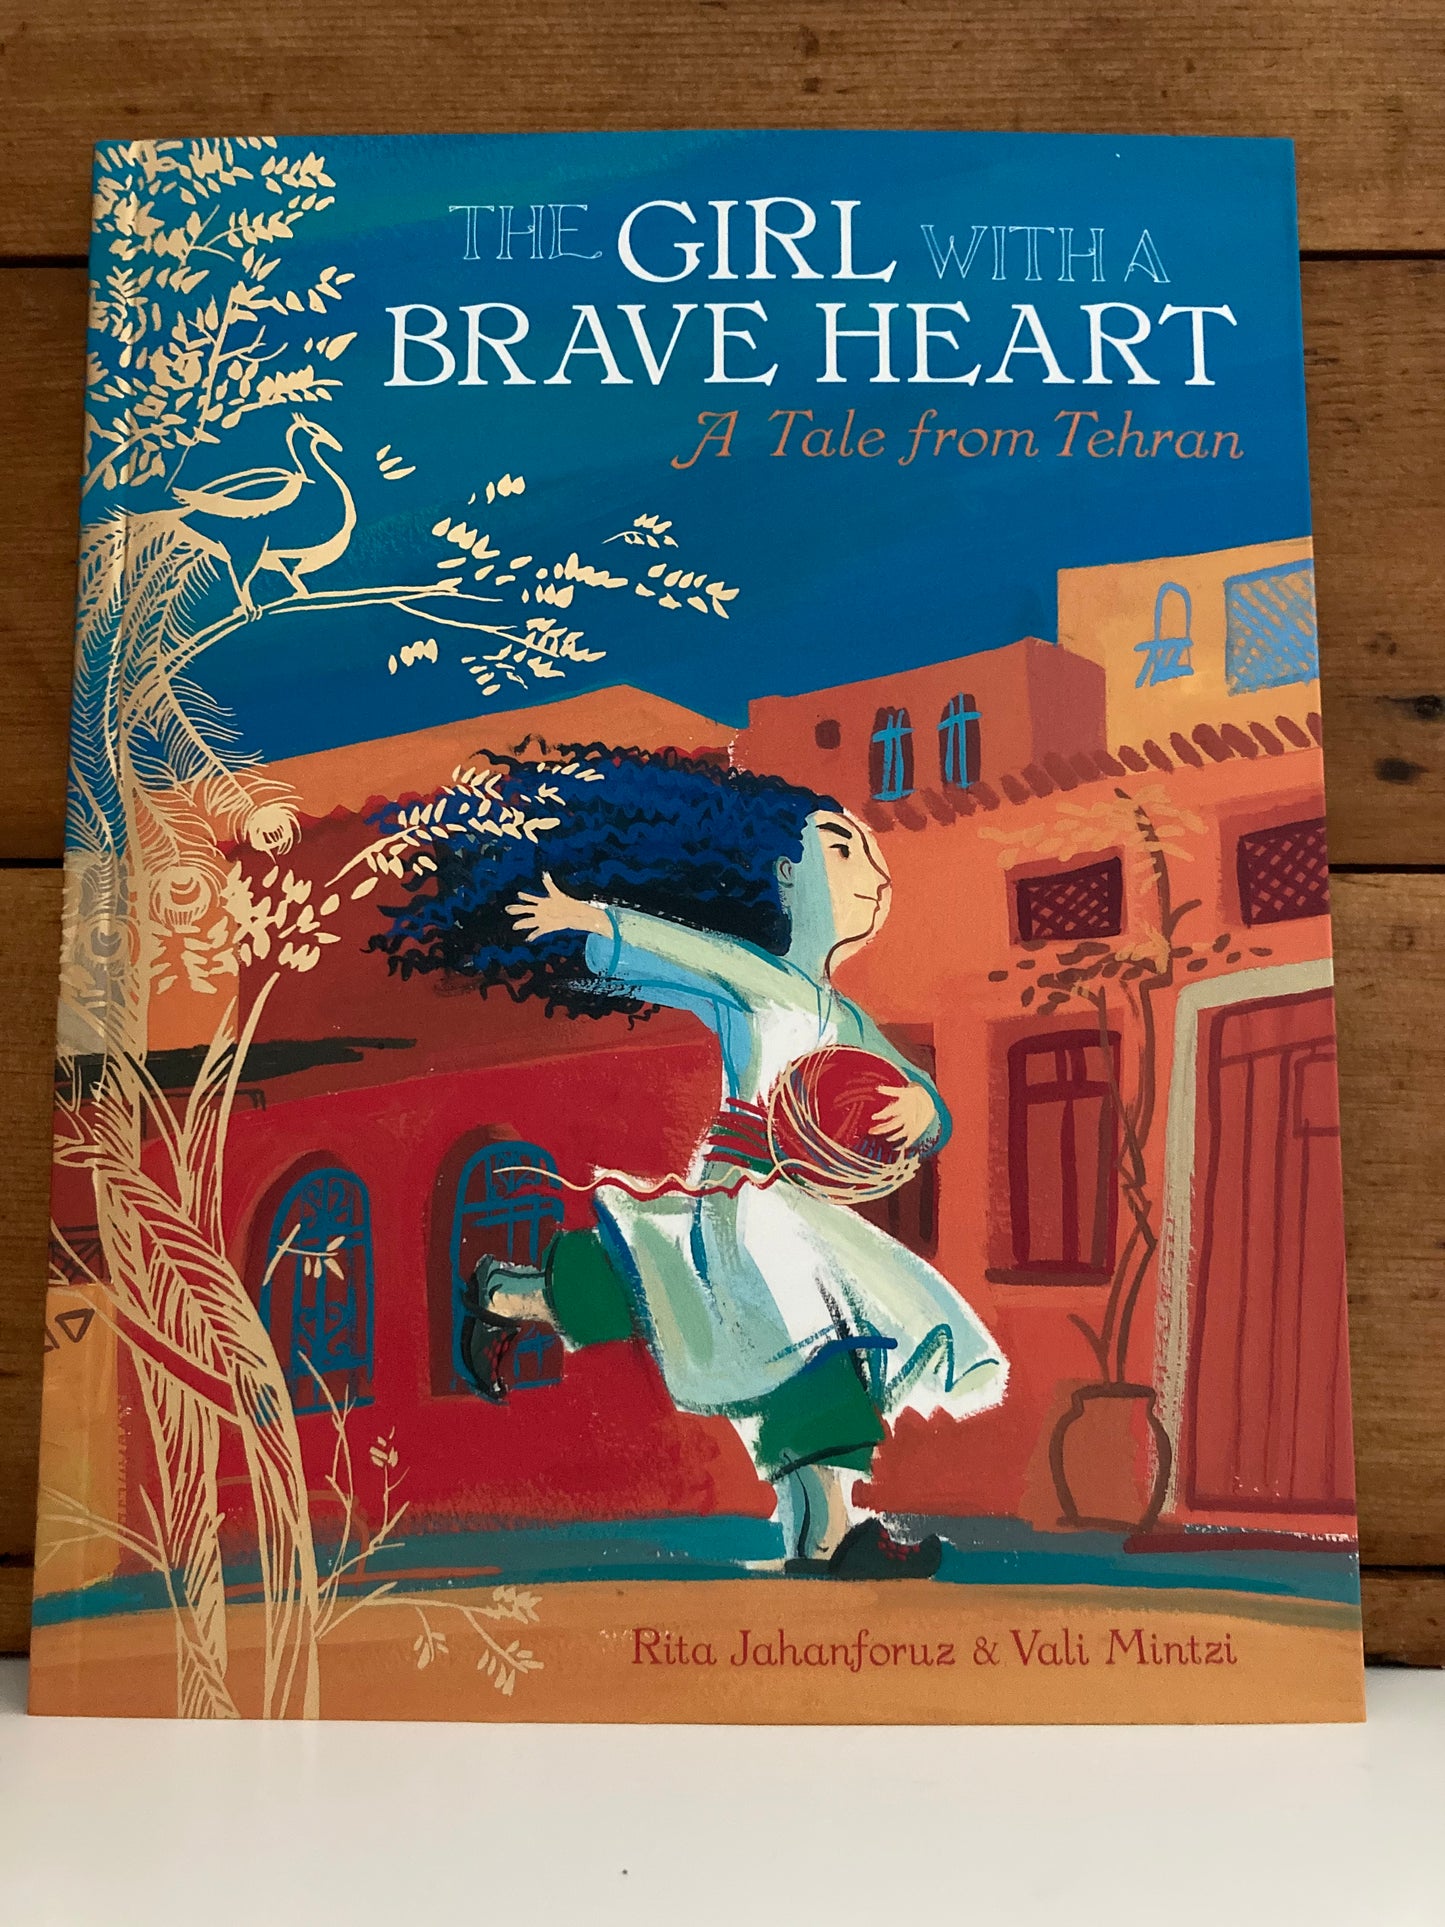 Educational Children’s Picture Book - THE GIRL WITH A BRAVE HEART